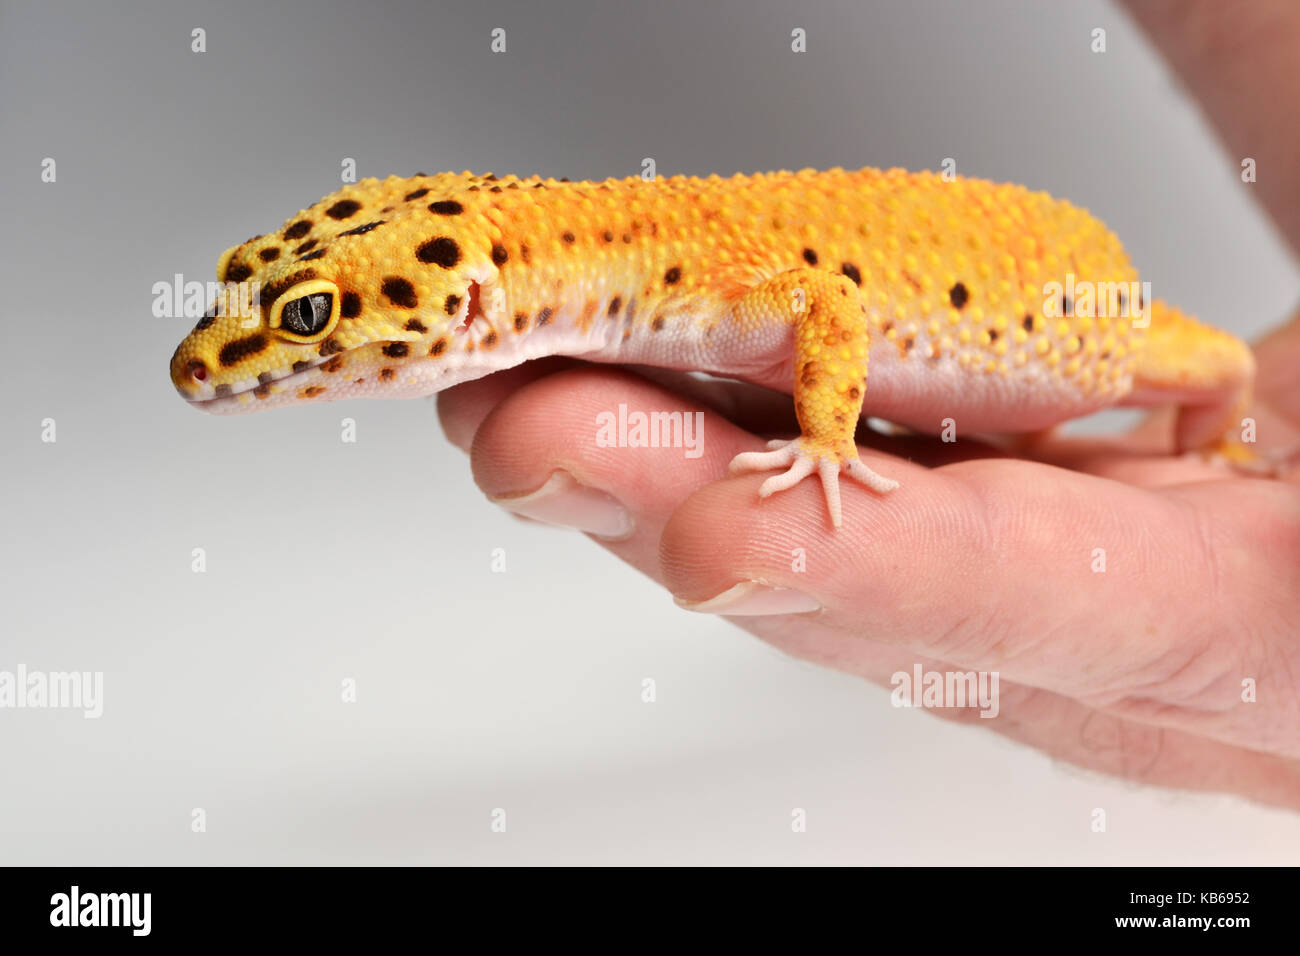 A Leopard Gecko (Eublepharis macularius) being held in a studio with a white background. Stock Photo